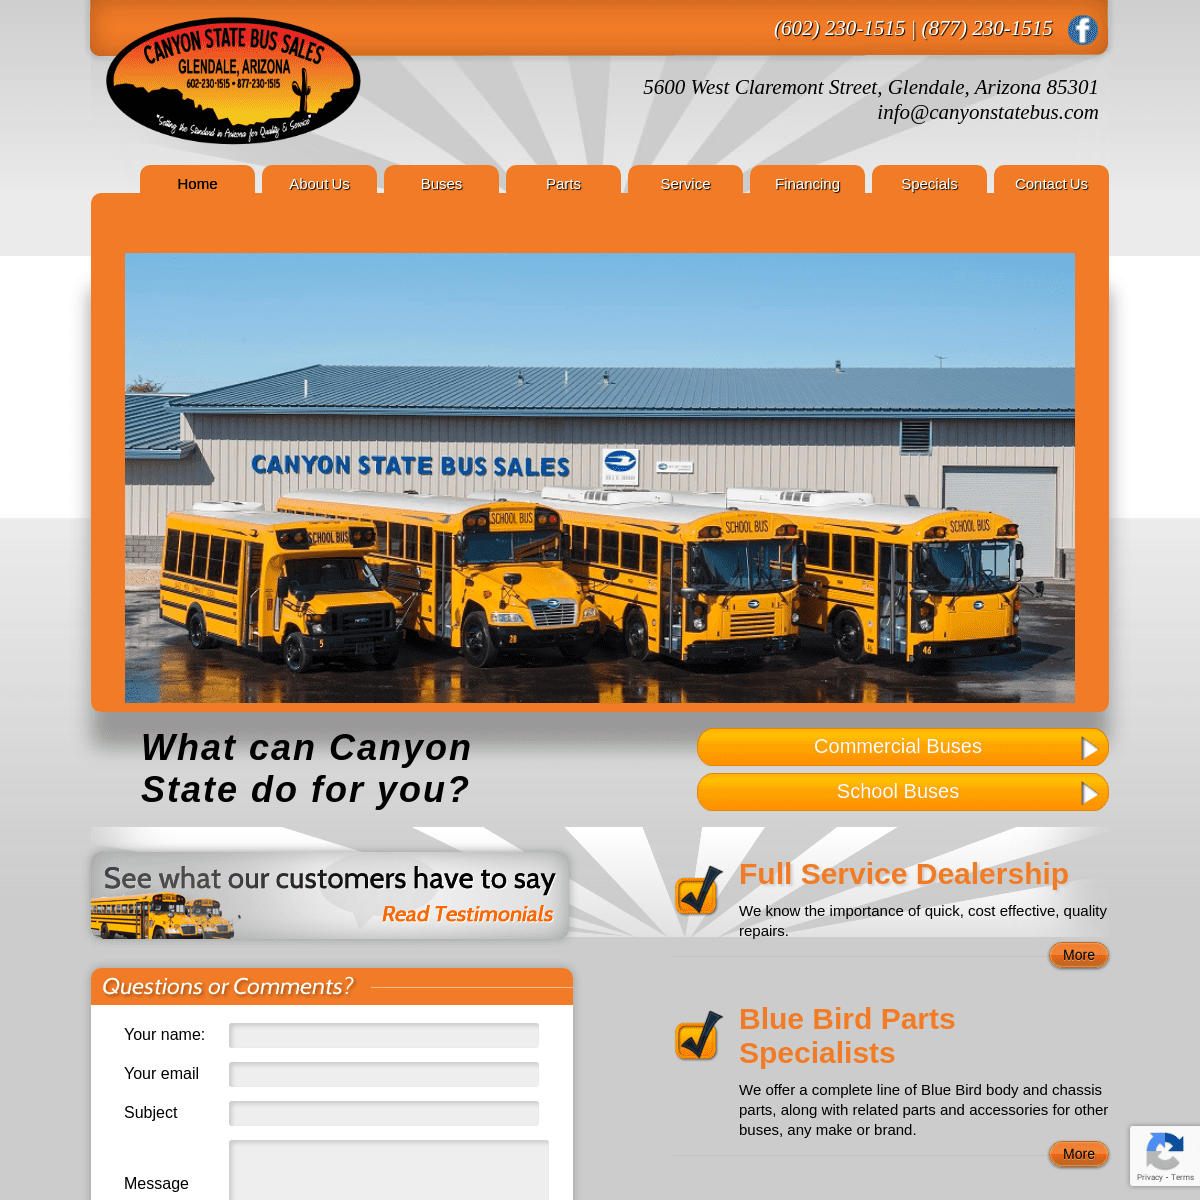 A complete backup of https://canyonstatebus.com